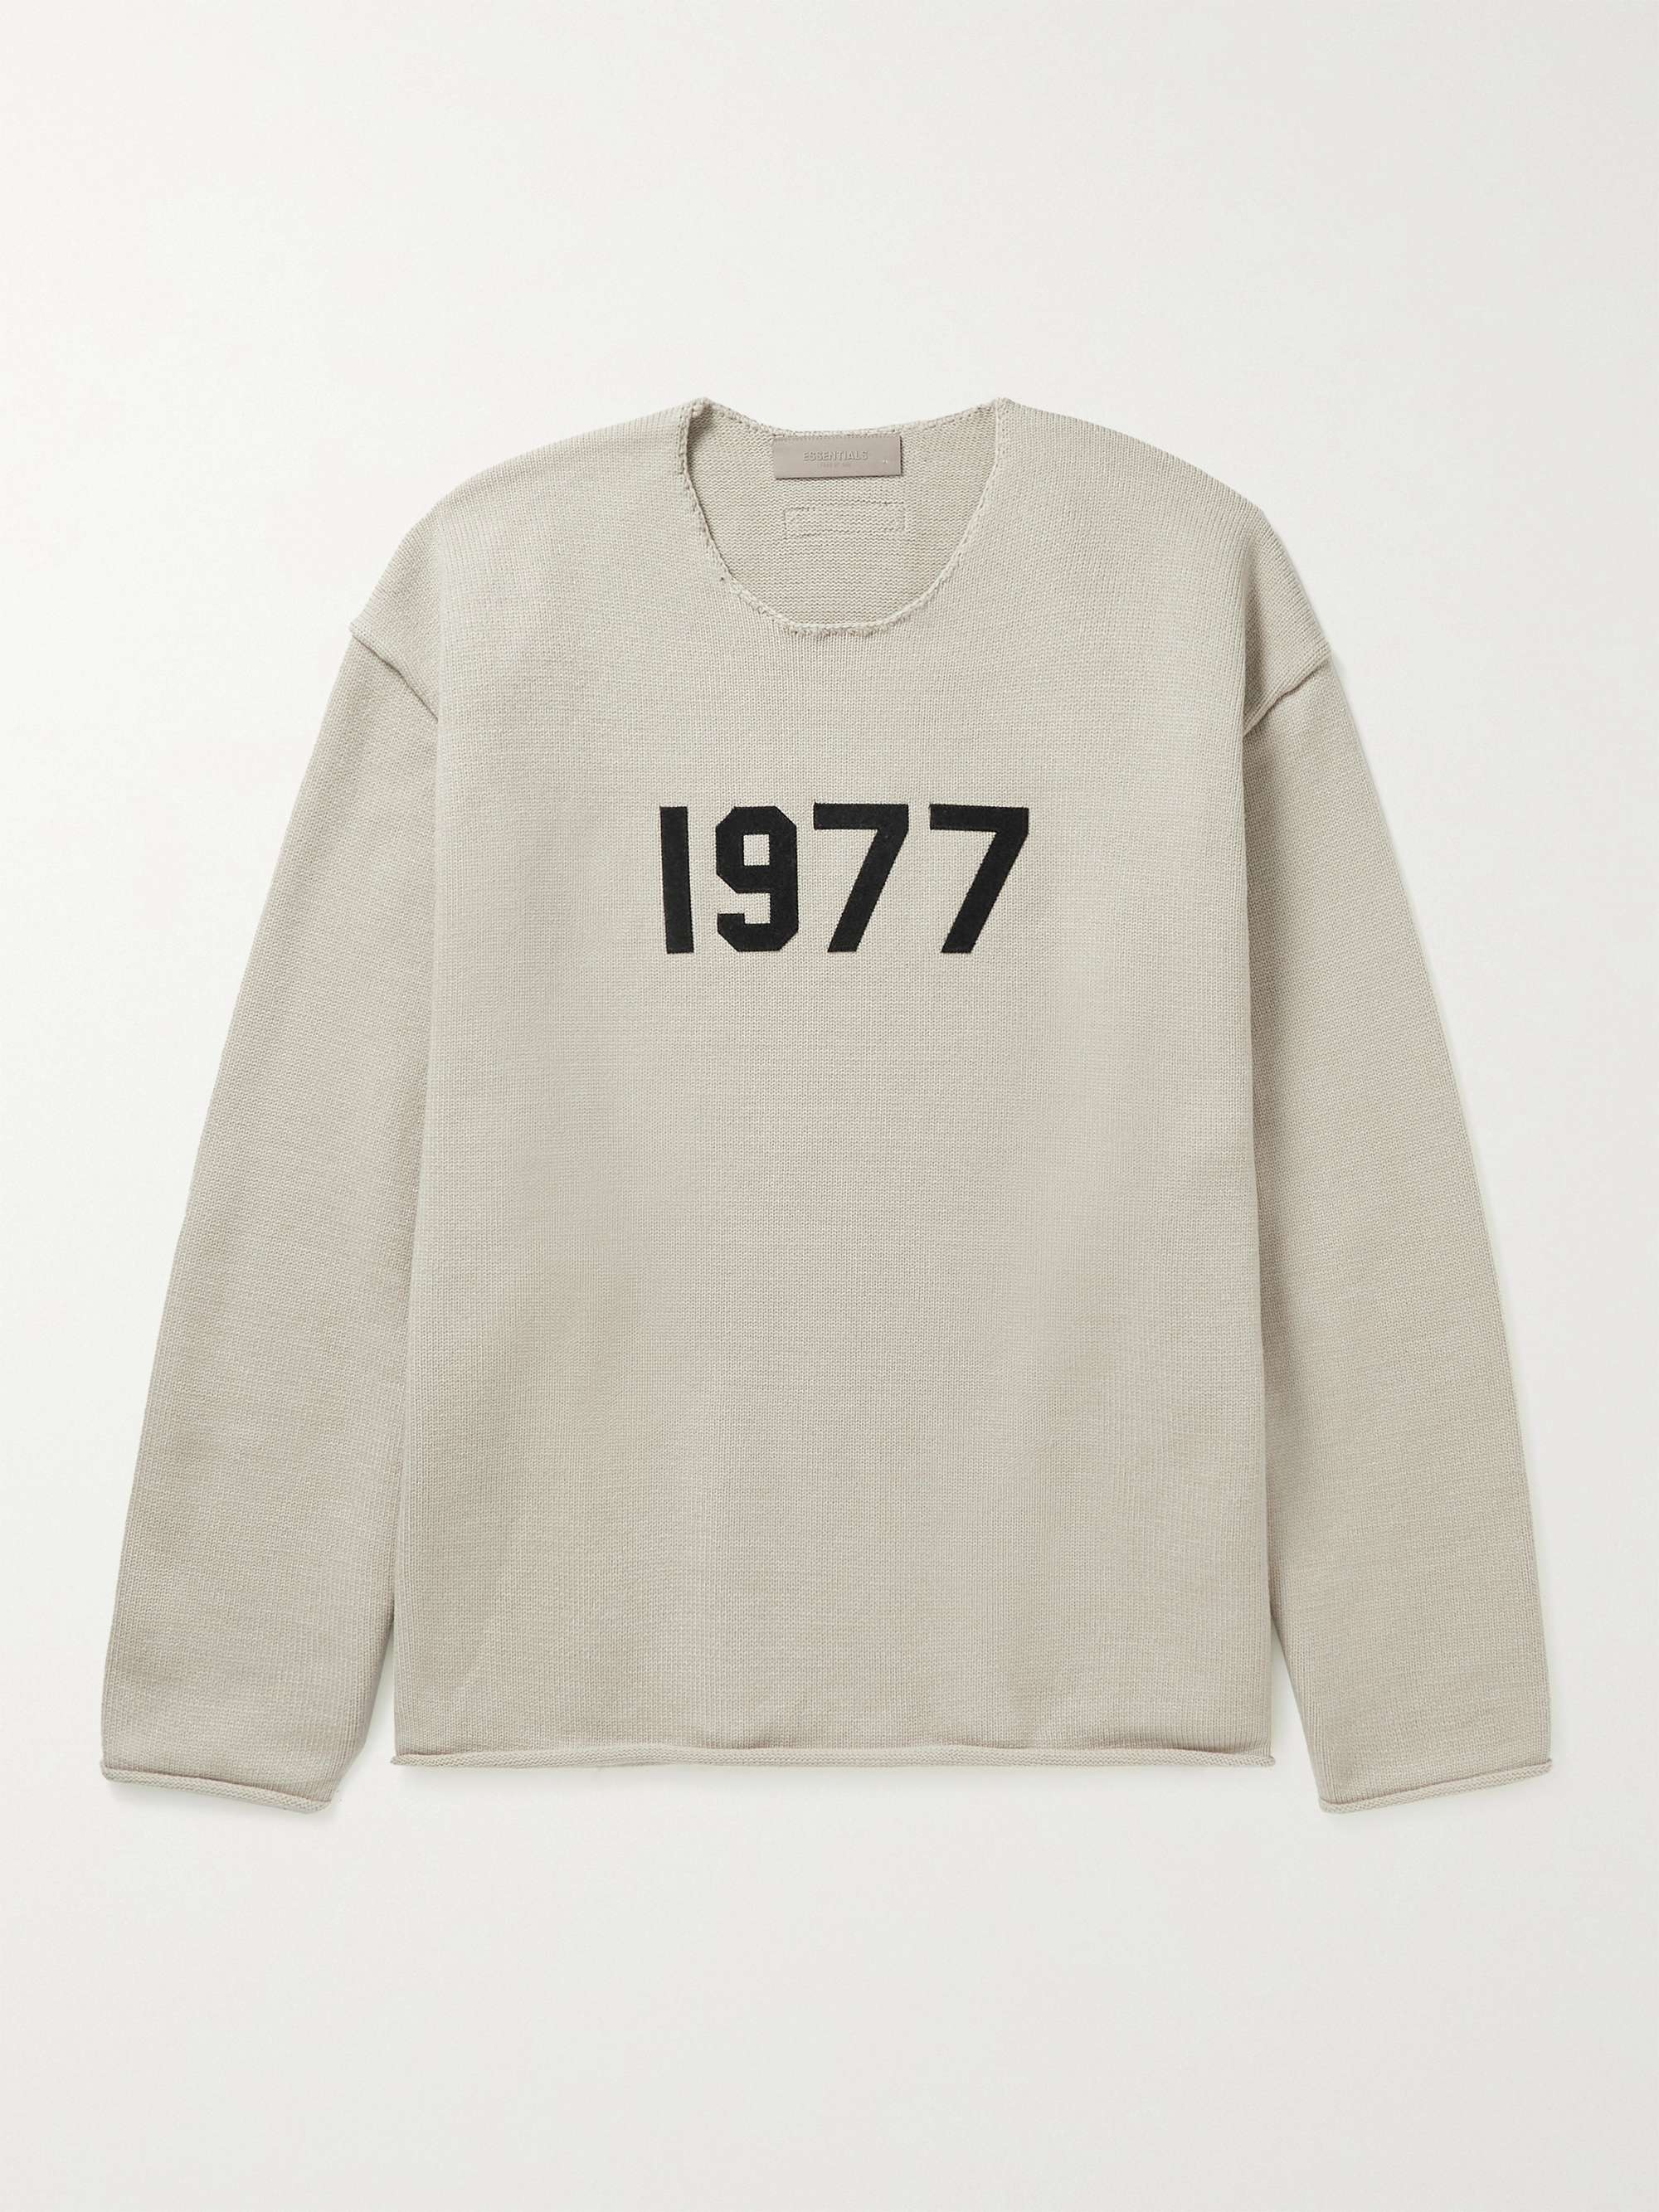 2020 FEAR OF GOD ESSENTIALS FOG LOGO Letter Print Lovers bottoming sweater